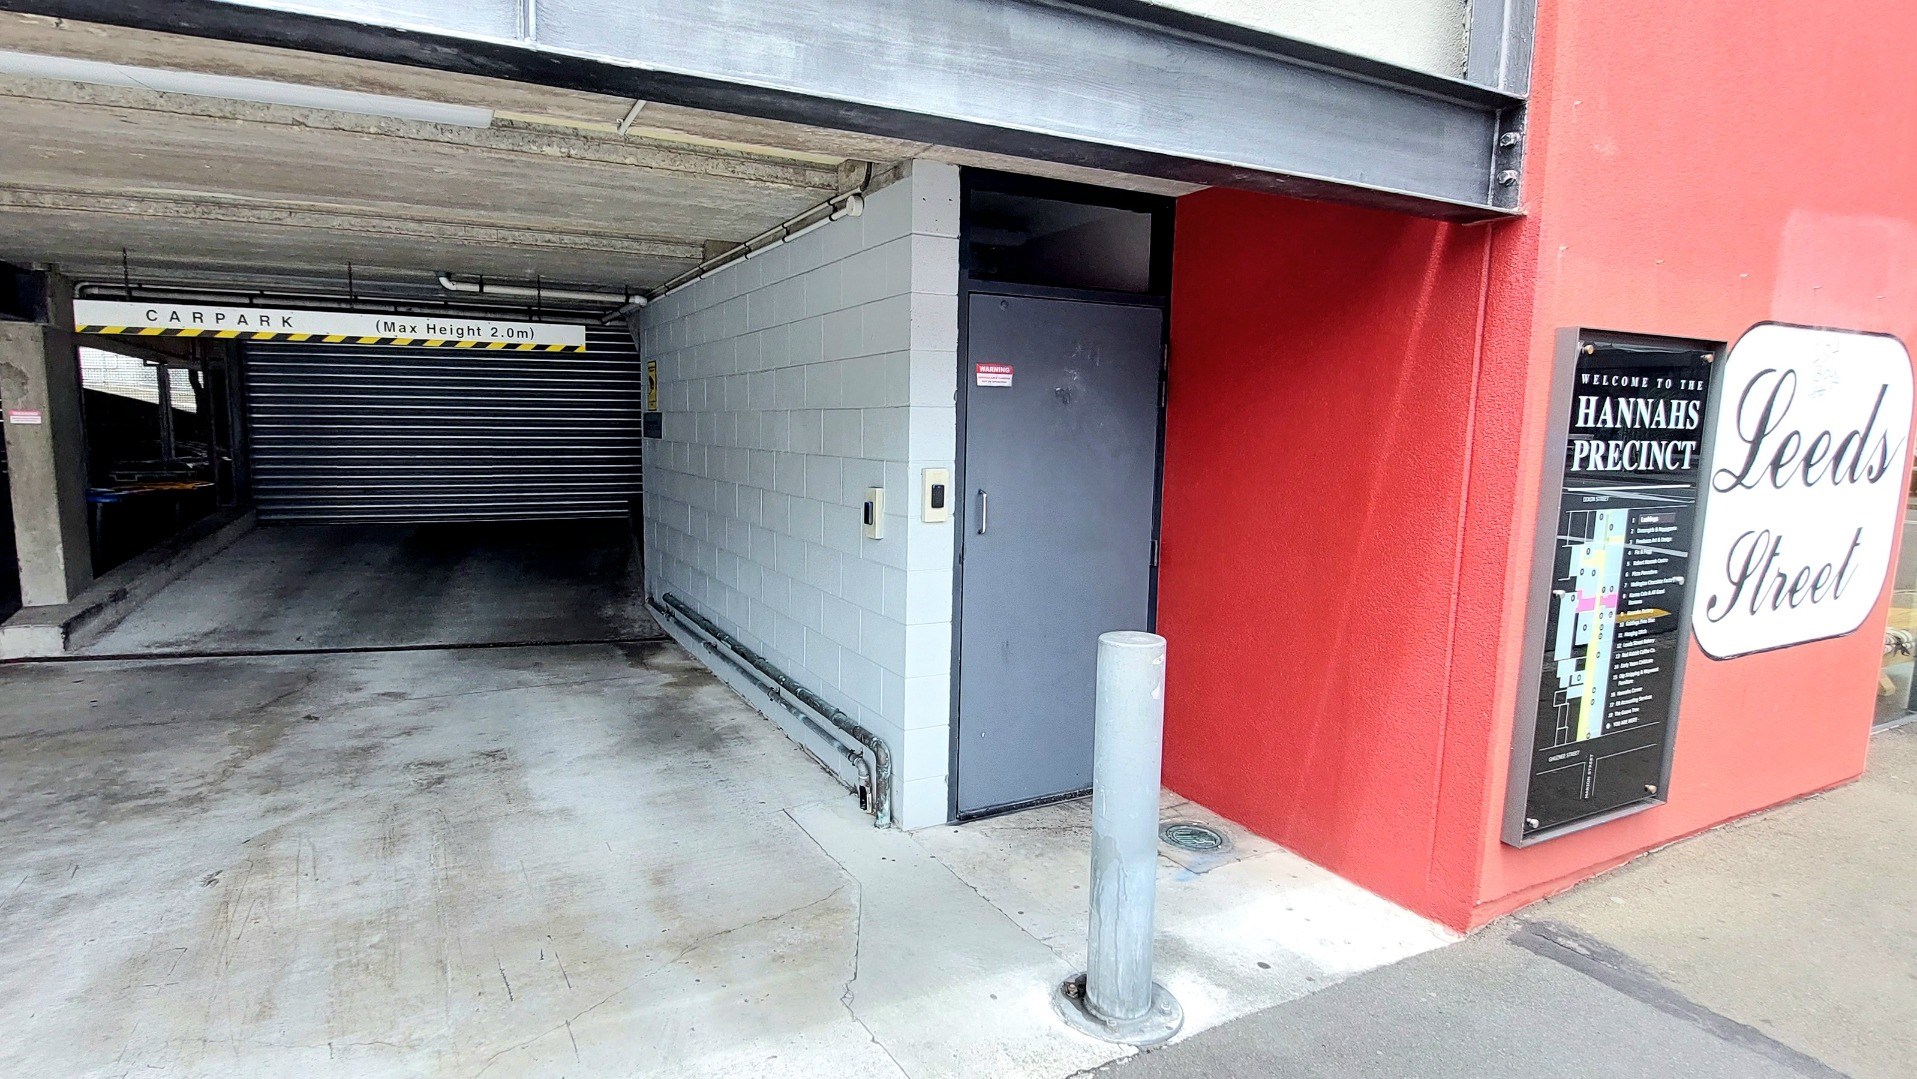 Real Estate For Rent Houses & Apartments : Inner City Secure Car Park, Wellington